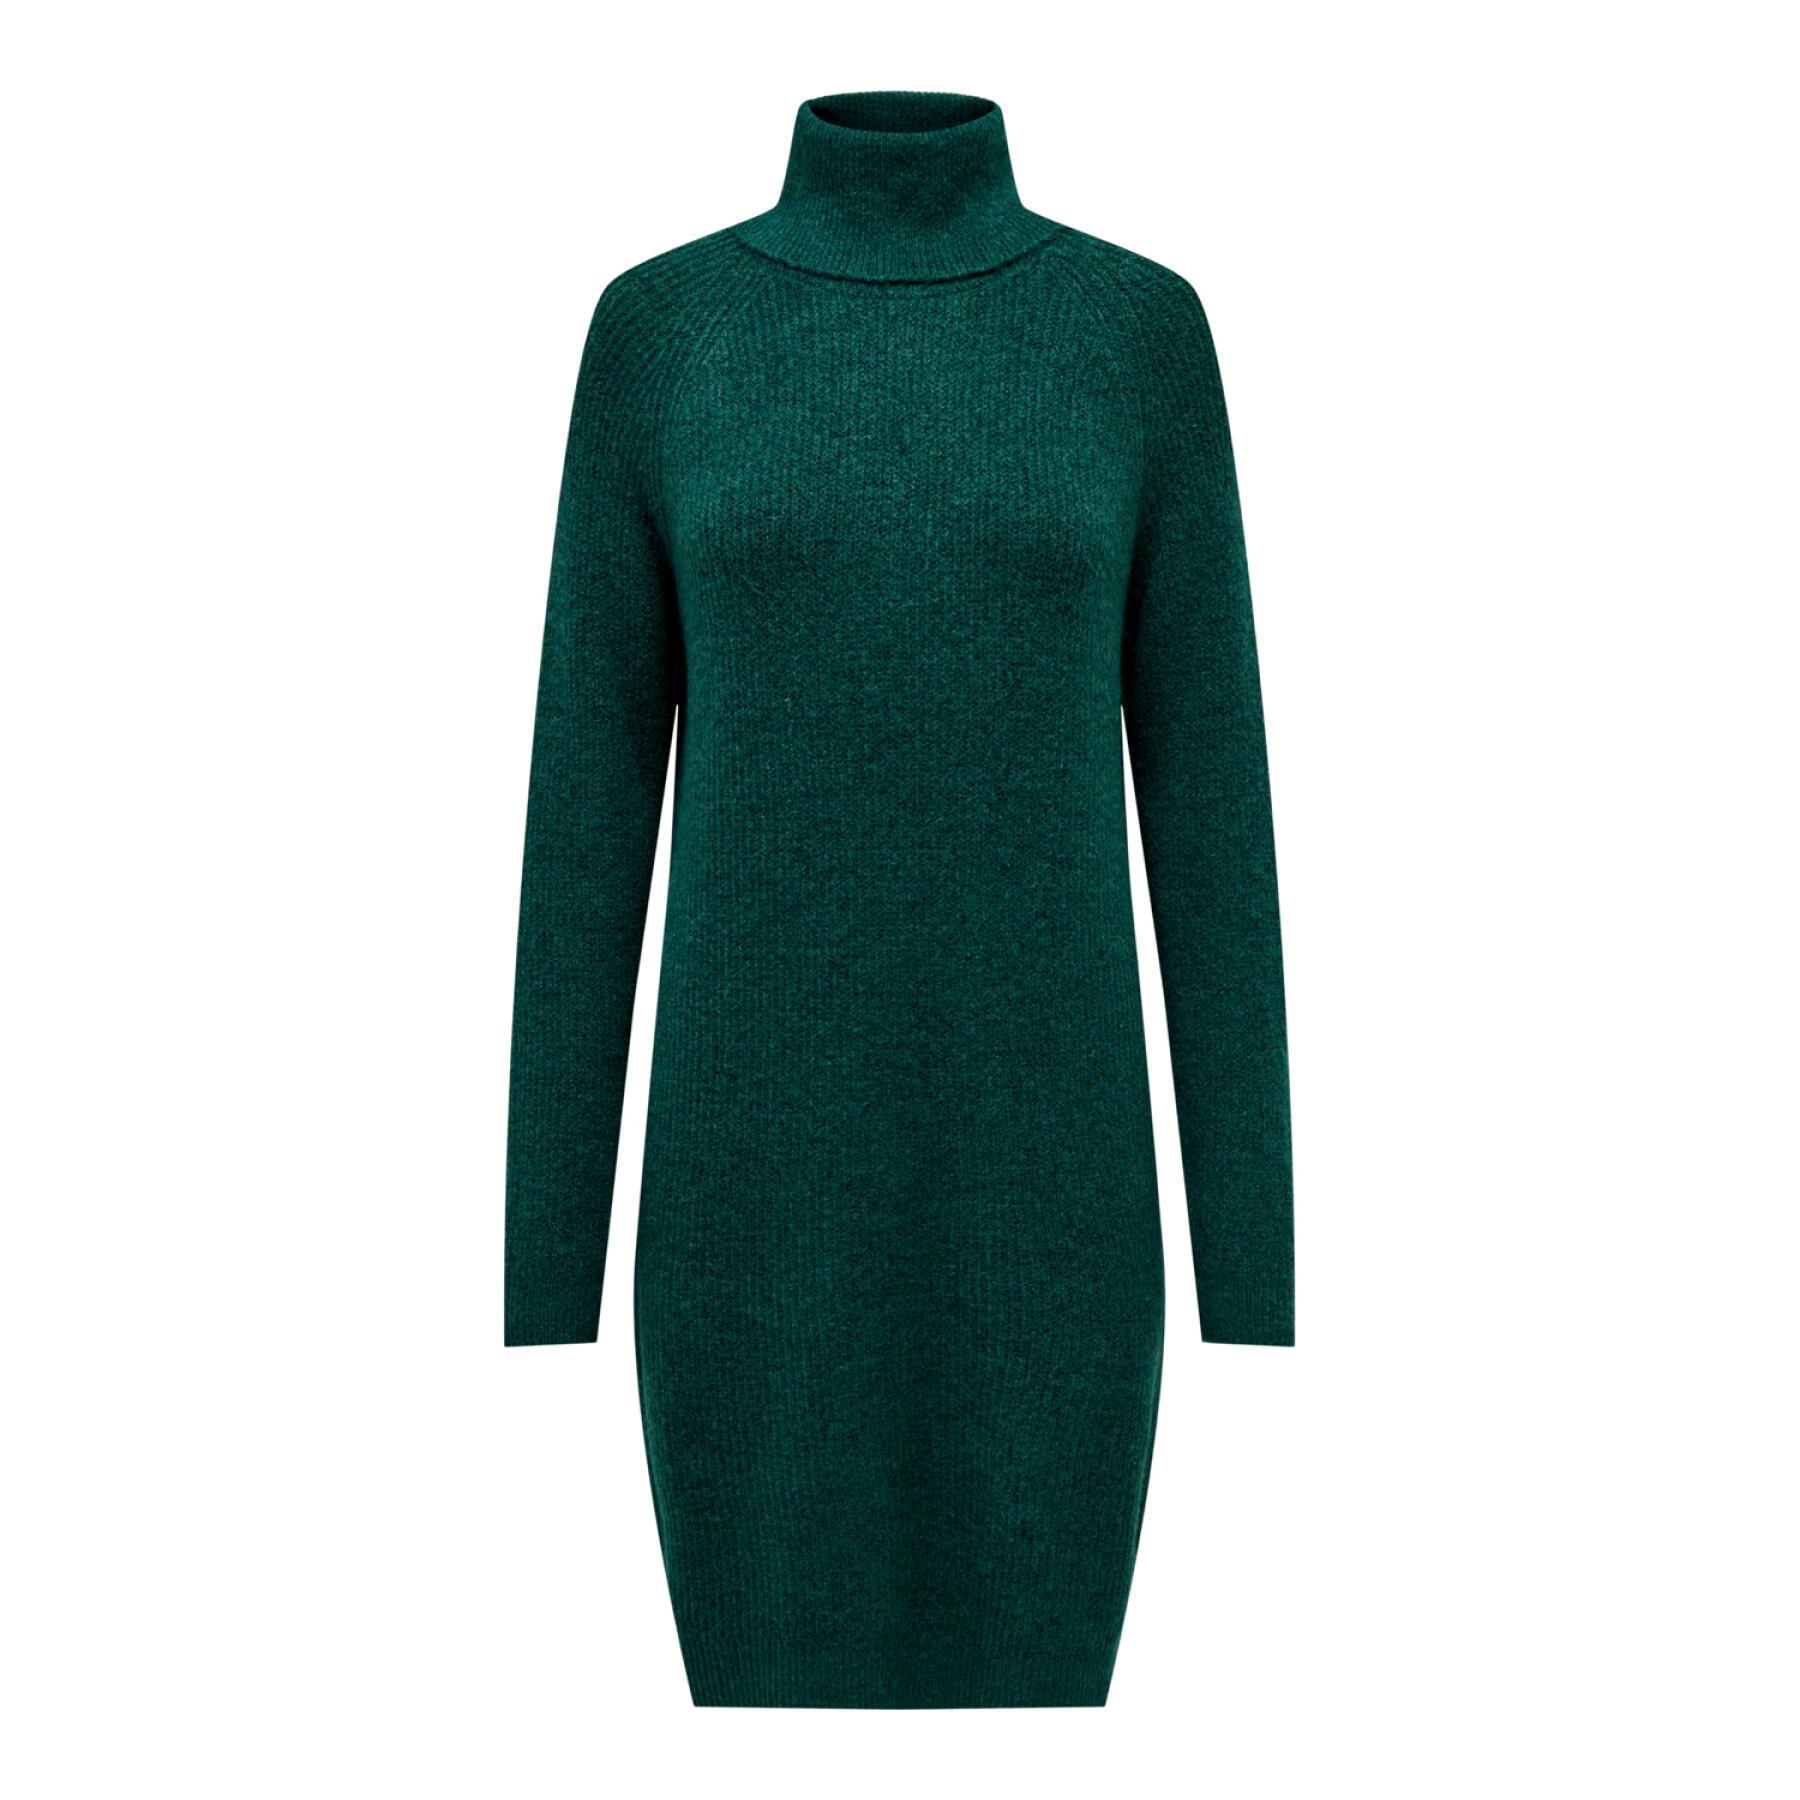 Women's long-sleeved turtleneck dress Only Onlsilly Bf Knt